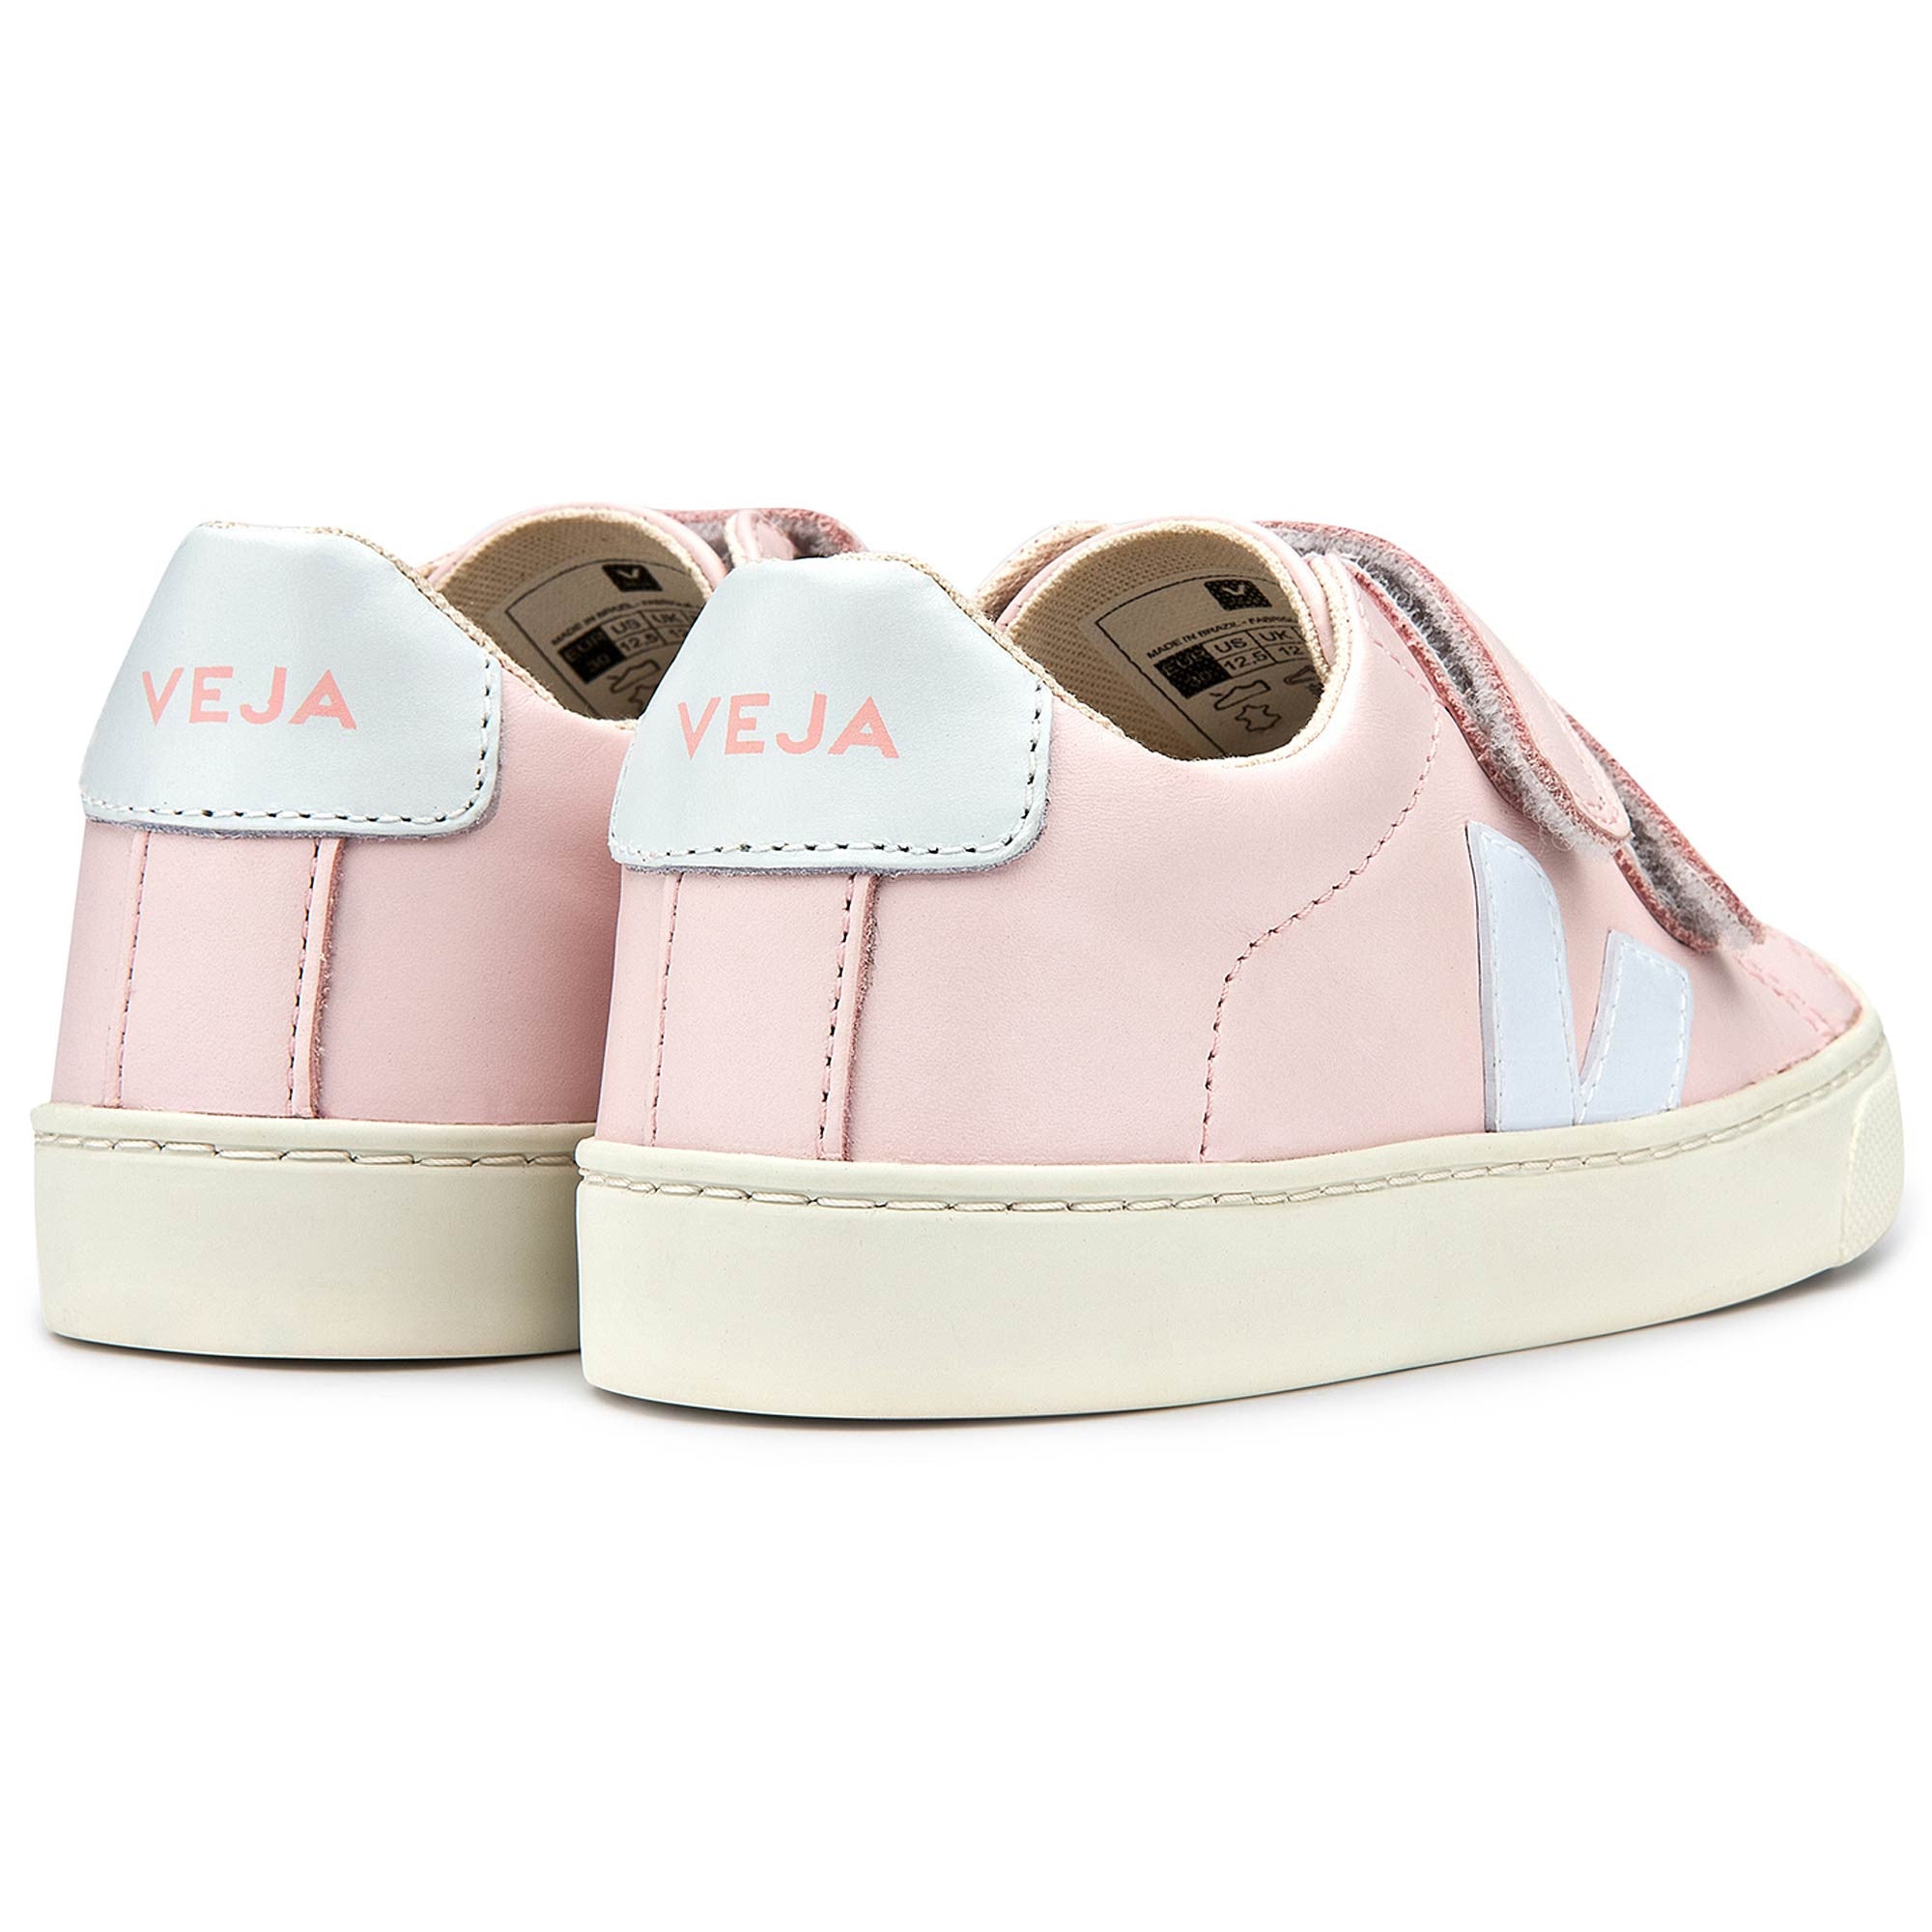 Girls Pink Leather Velcro Shoes - CÉMAROSE | Children's Fashion Store - 3